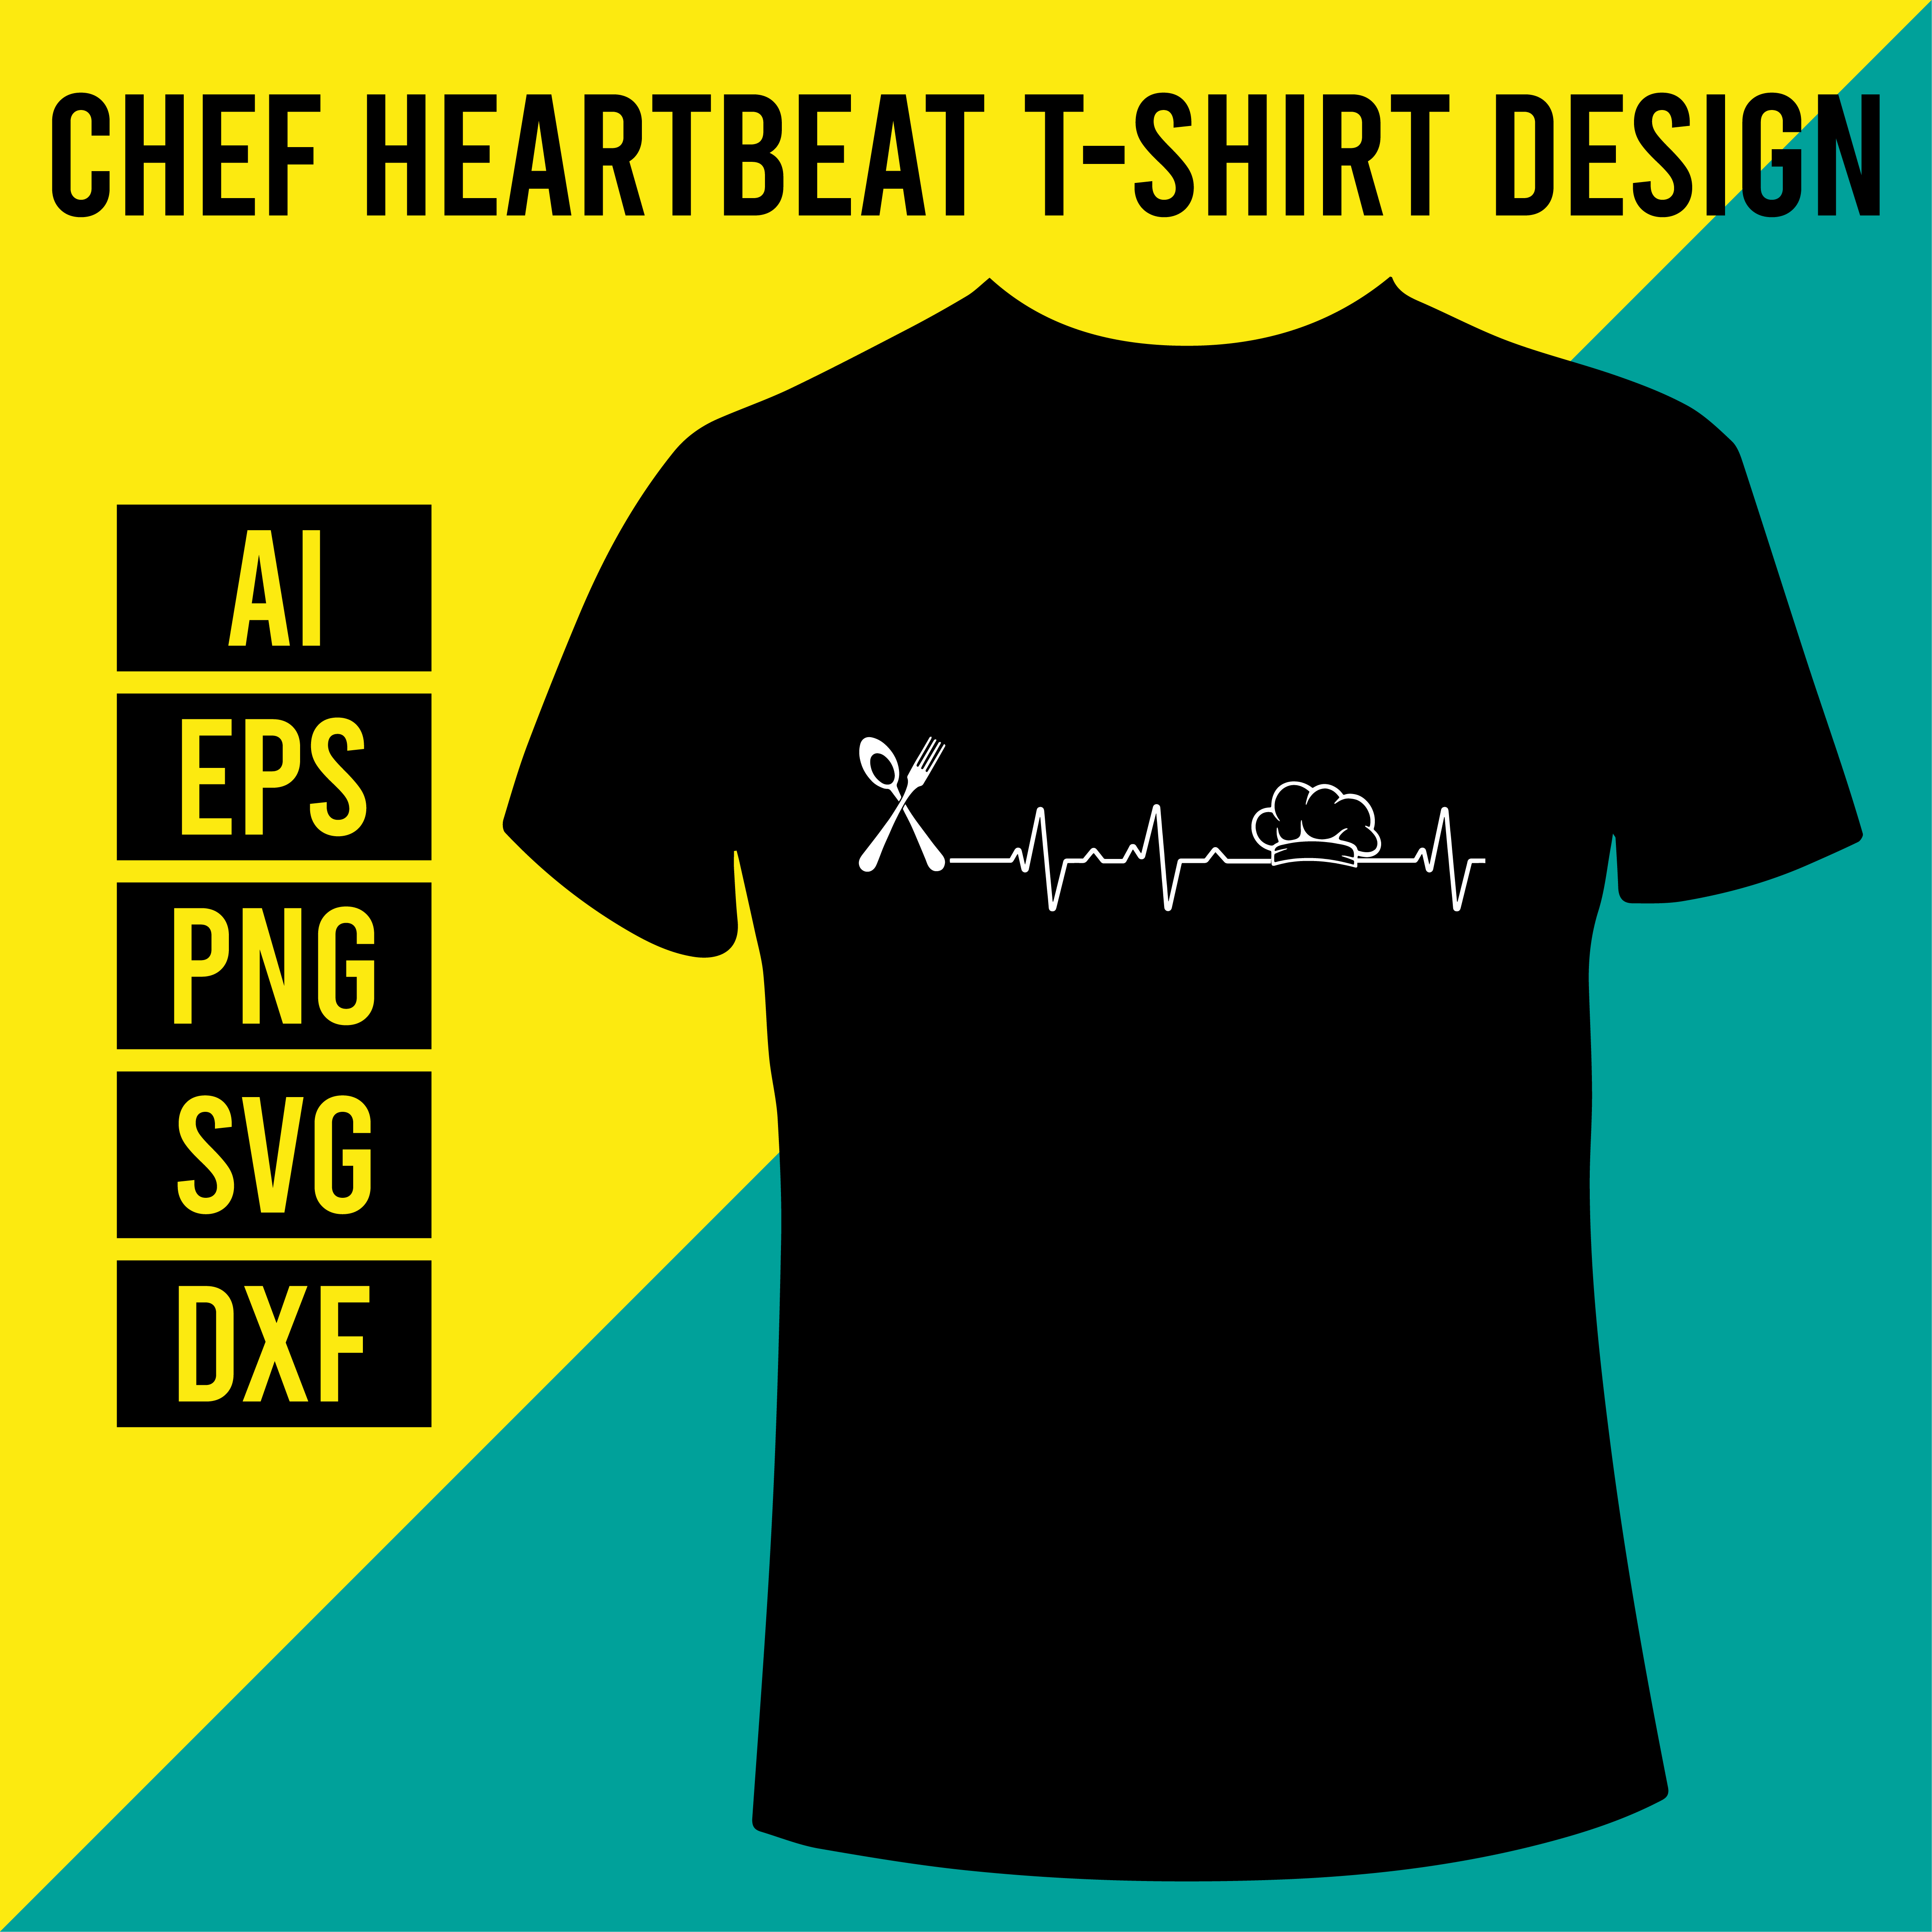 Chef Heartbeat T-Shirt Design cover image.